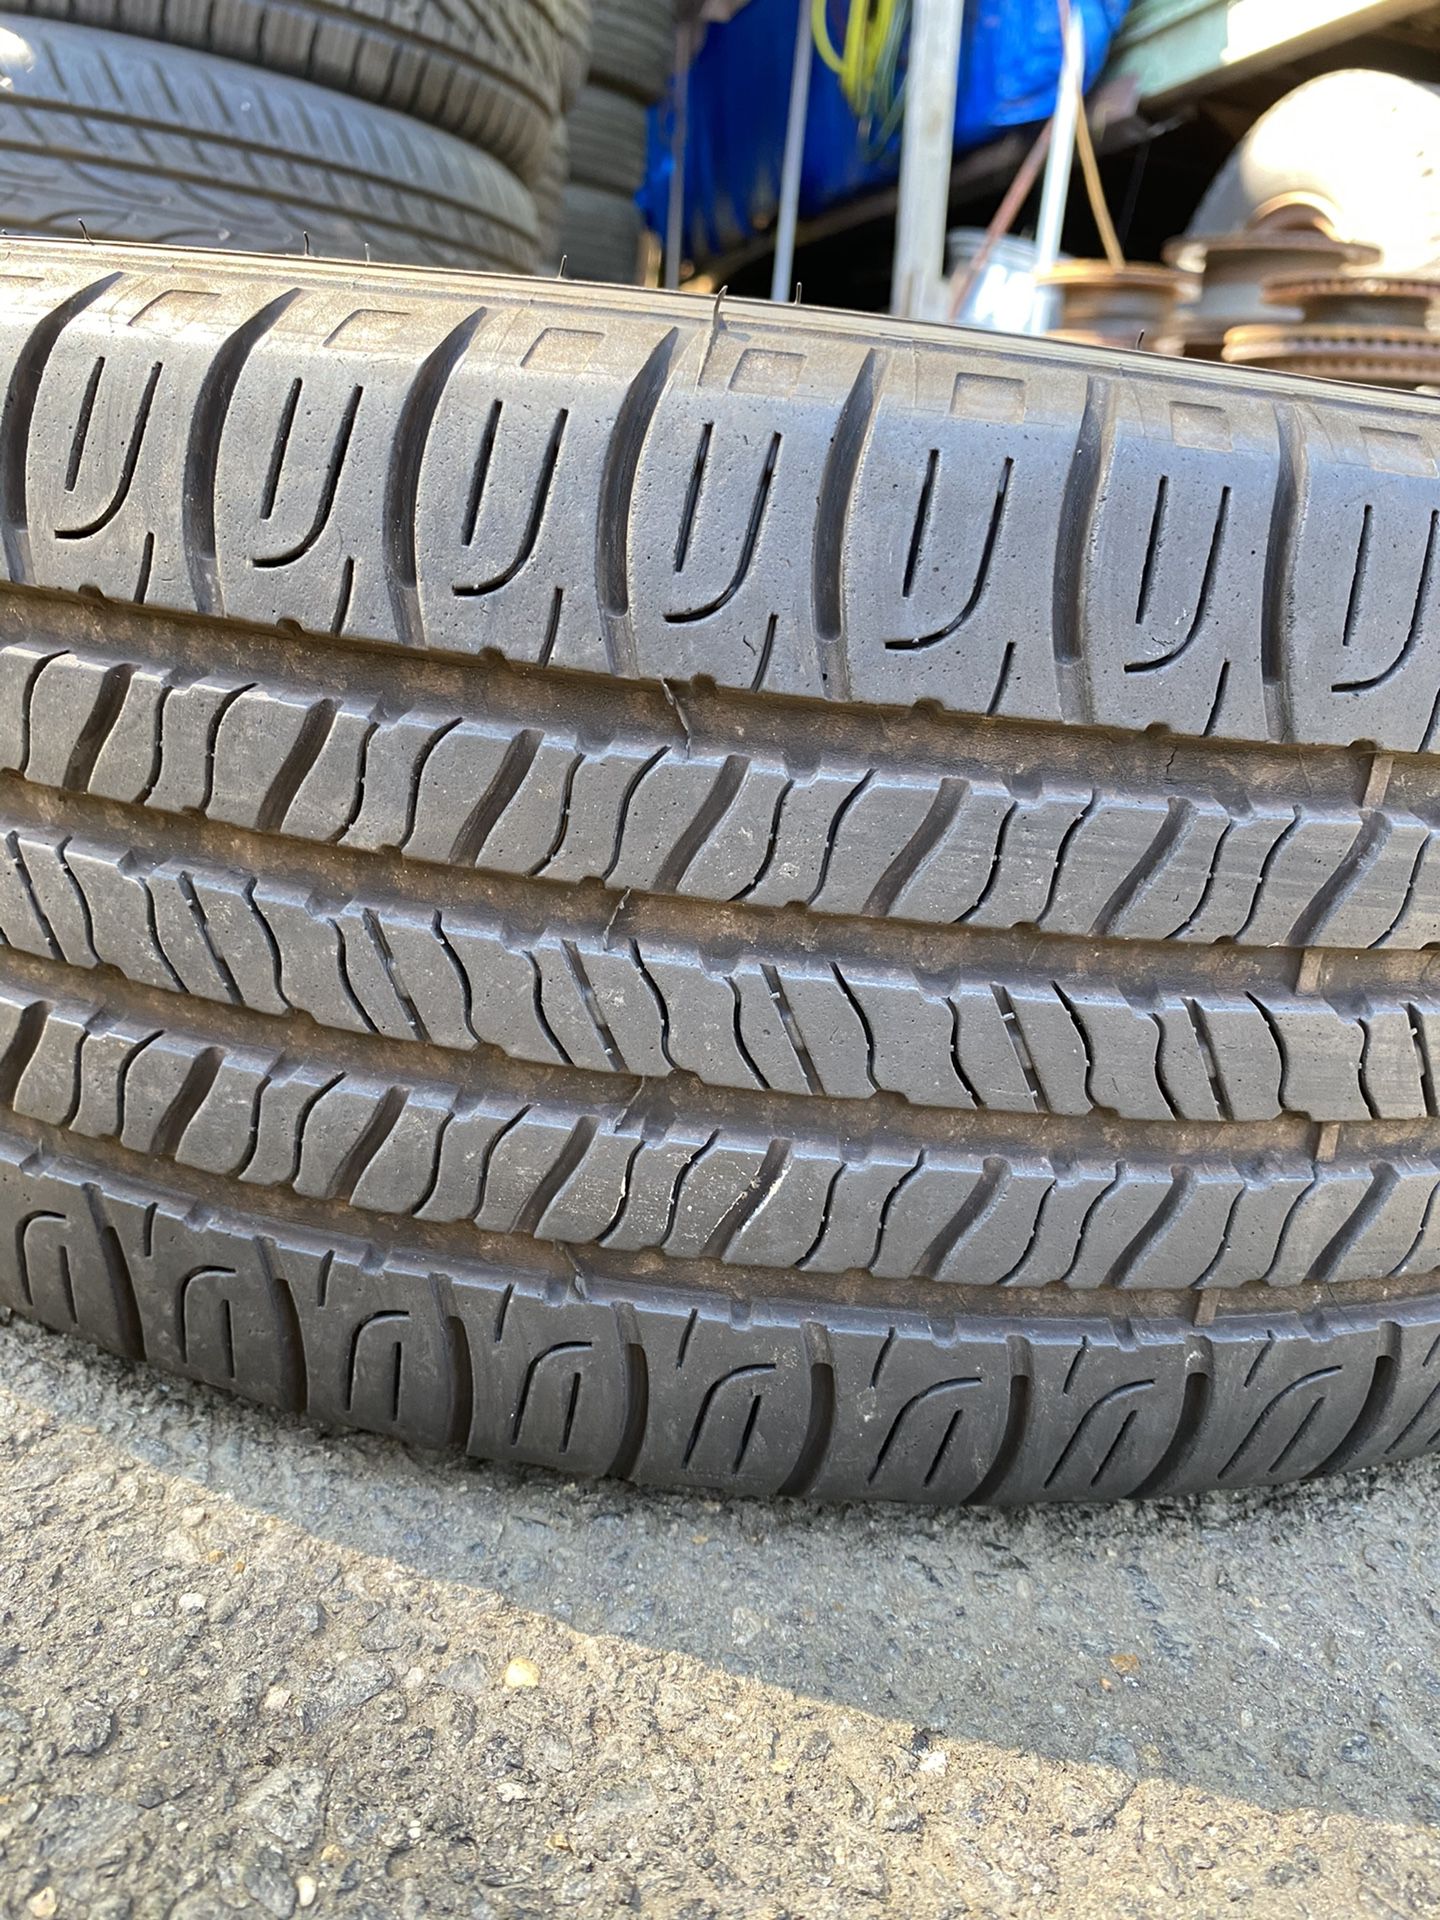 One used tire 215/60R16 Goodyear $30